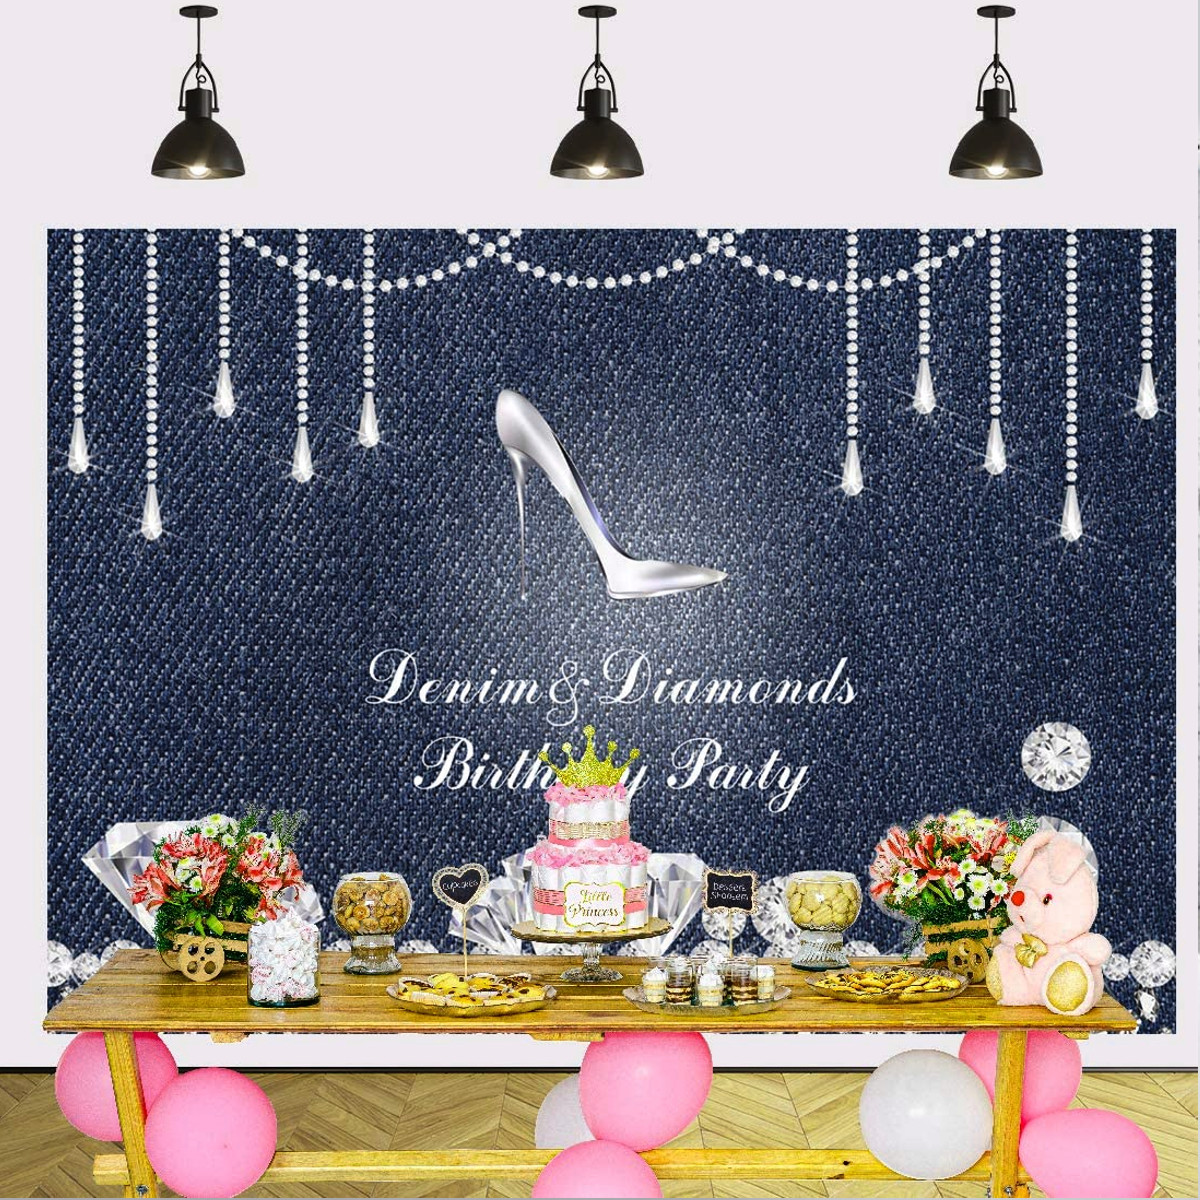 Happy-Birthday-Photography-Backdrop-Photo-Background-Studio-Home-Party-Decor-Props-1821552-2